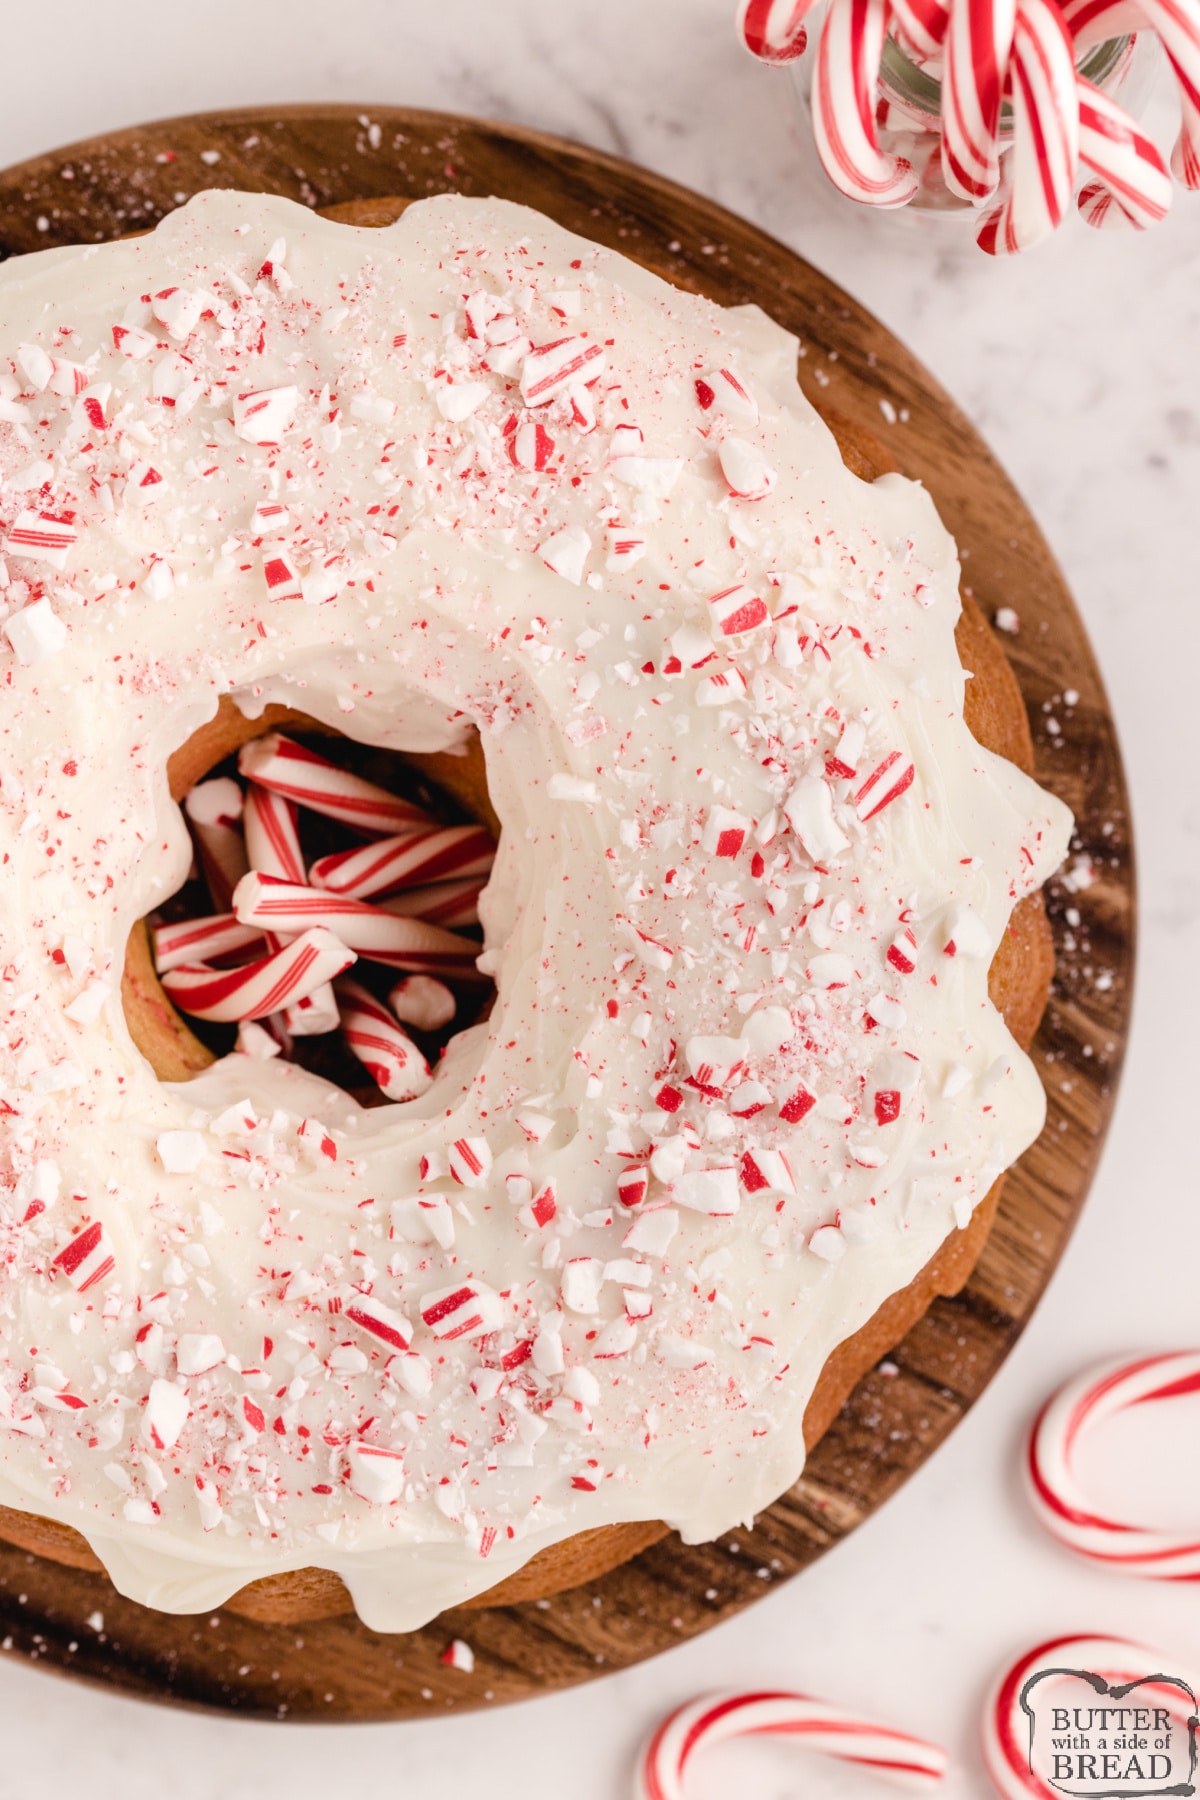 Peppermint cake recipe topped with creamy peppermint glaze